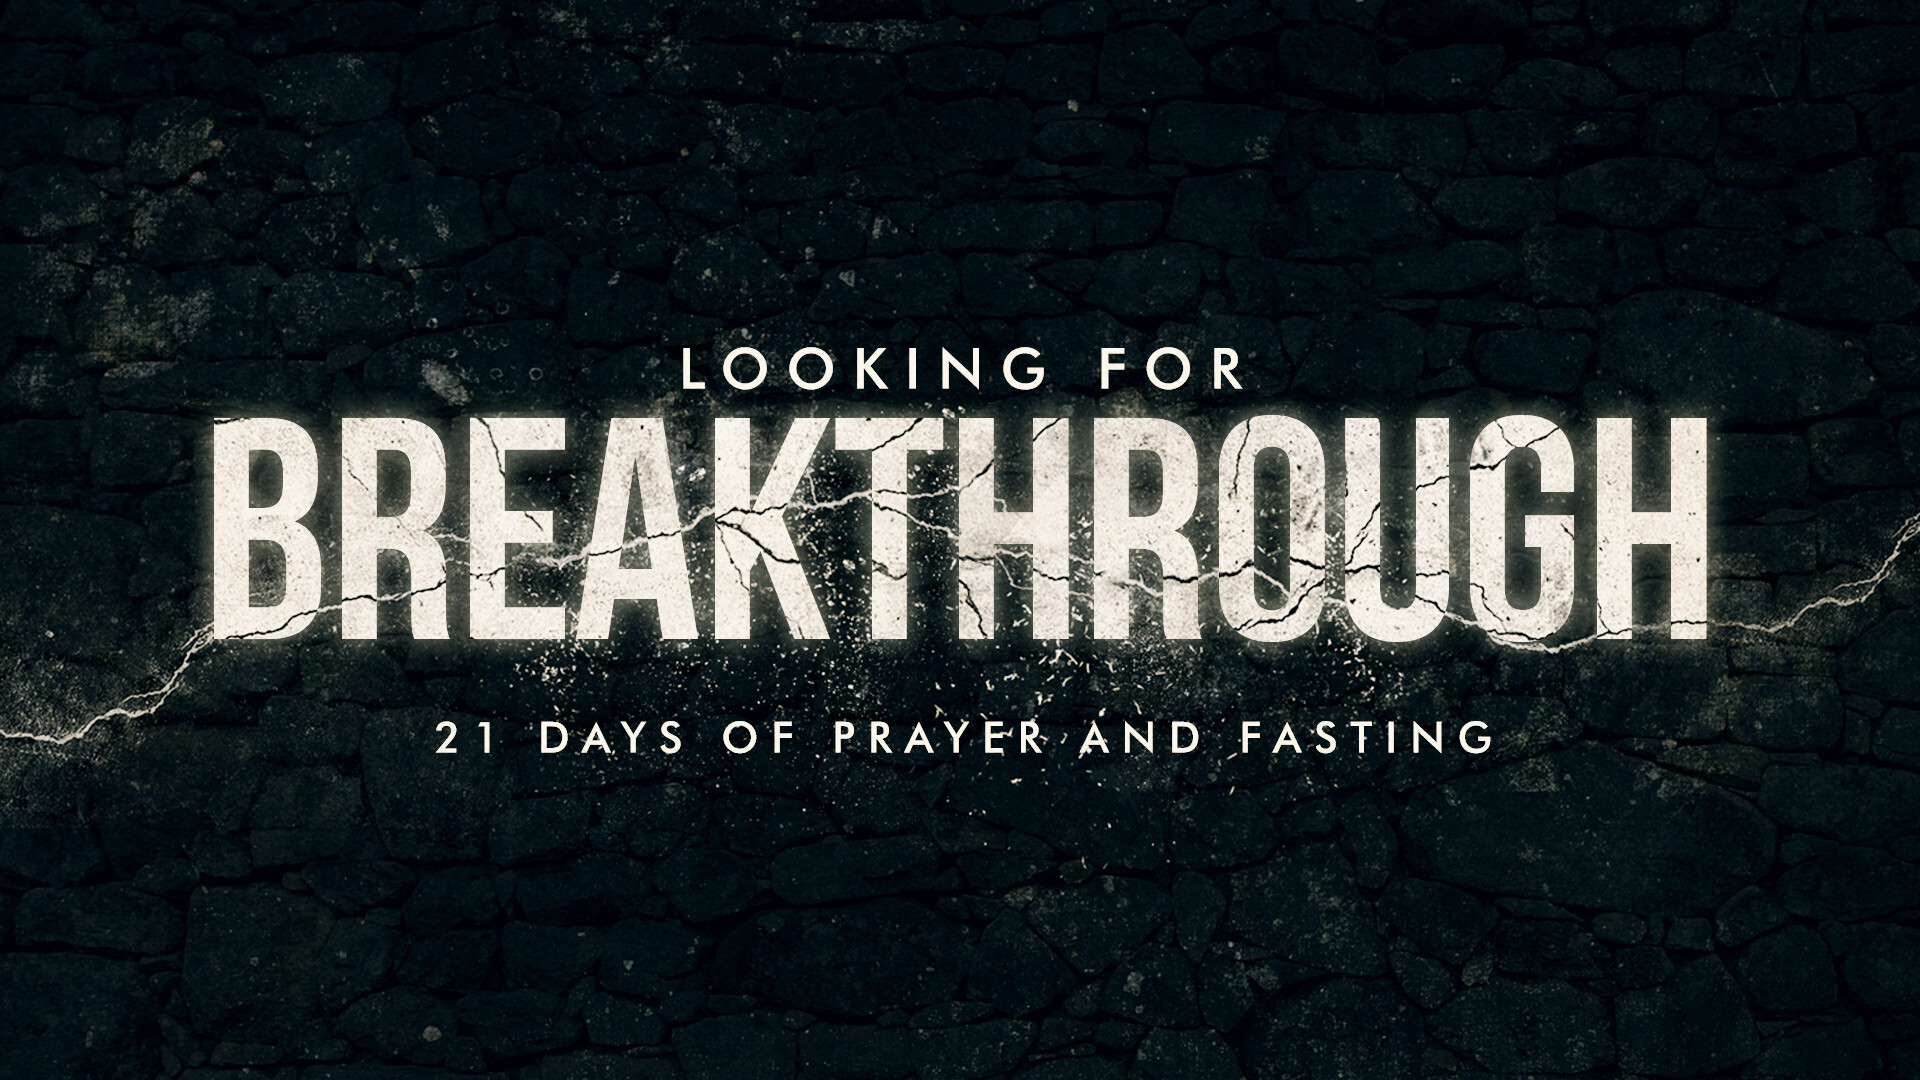 Searching for Breakthrough